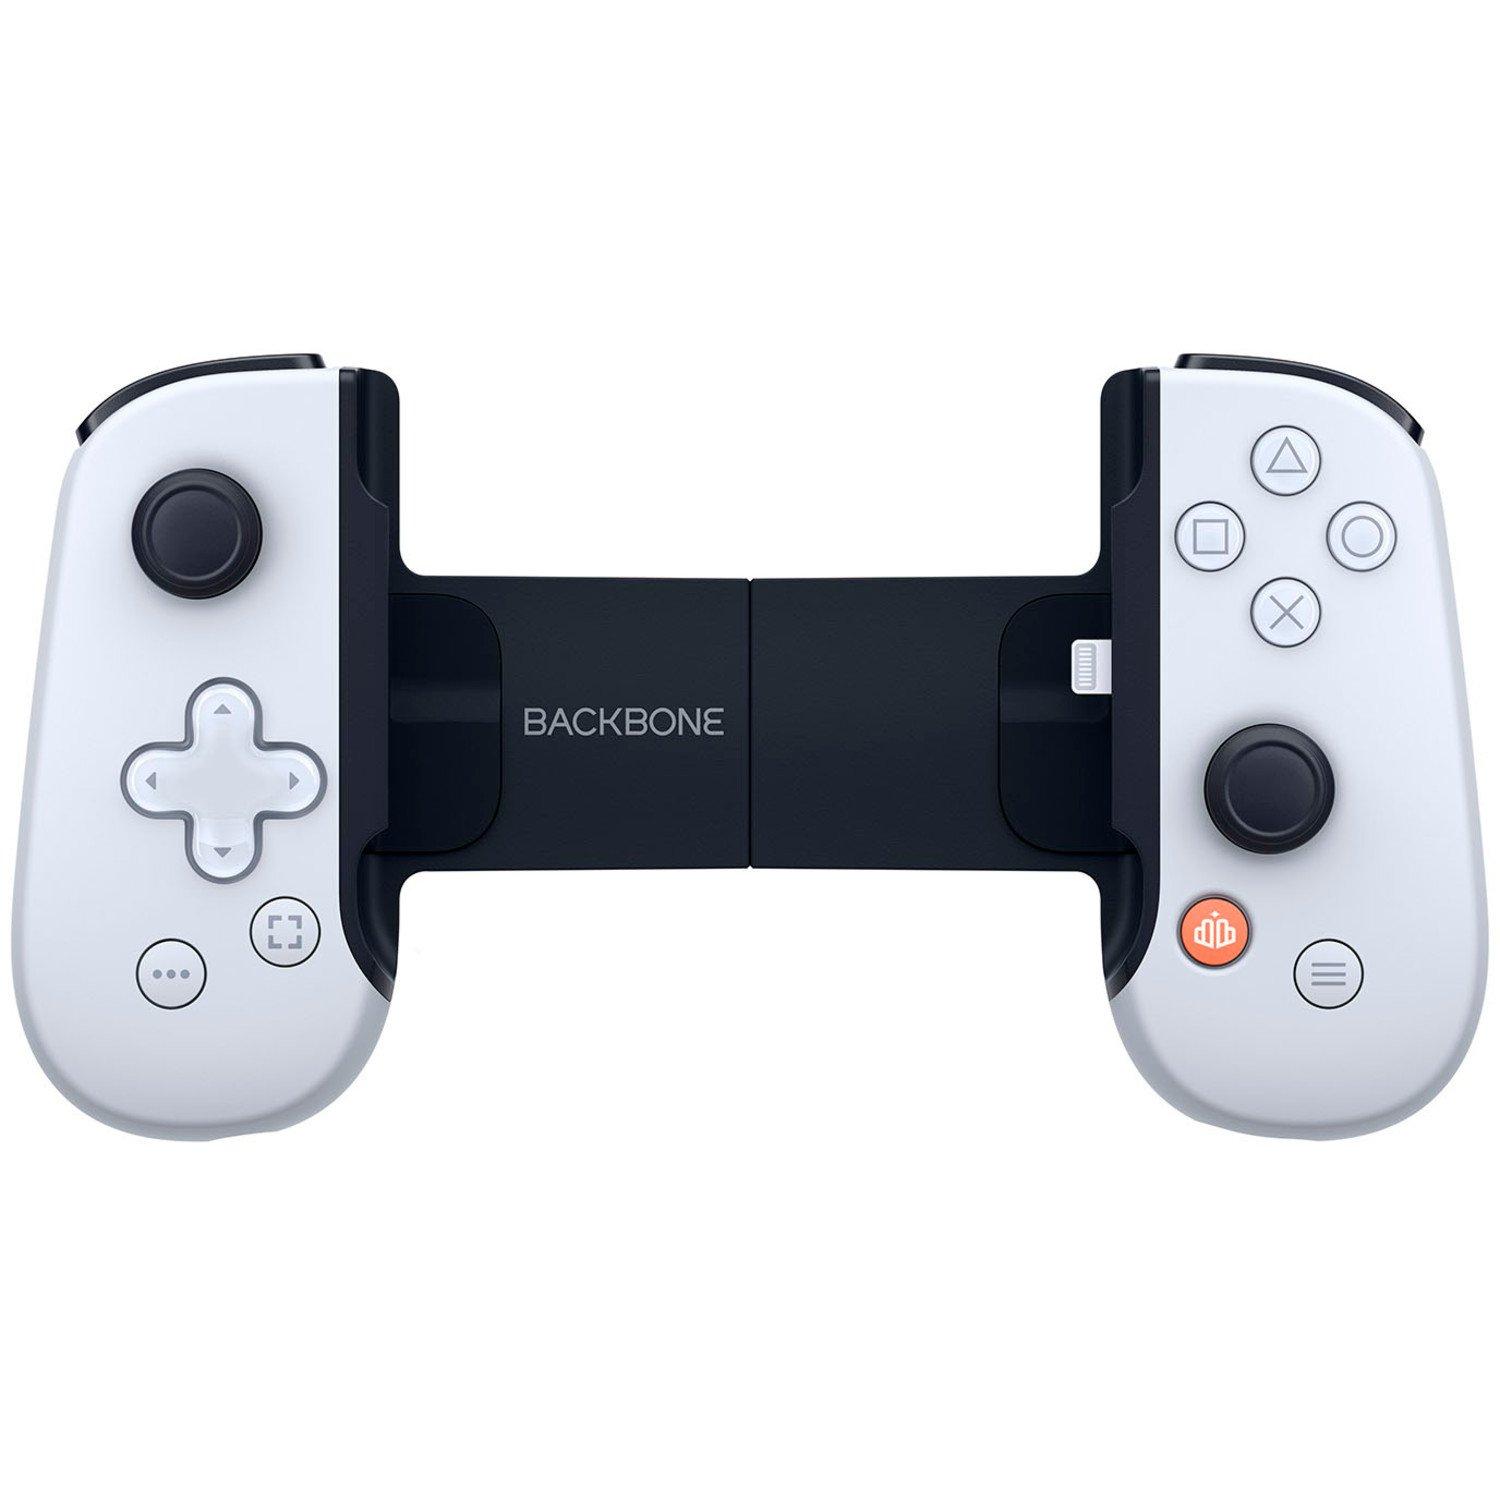 Backbone One Gaming Controller for iPhones - PlayStation Edition | GameStop